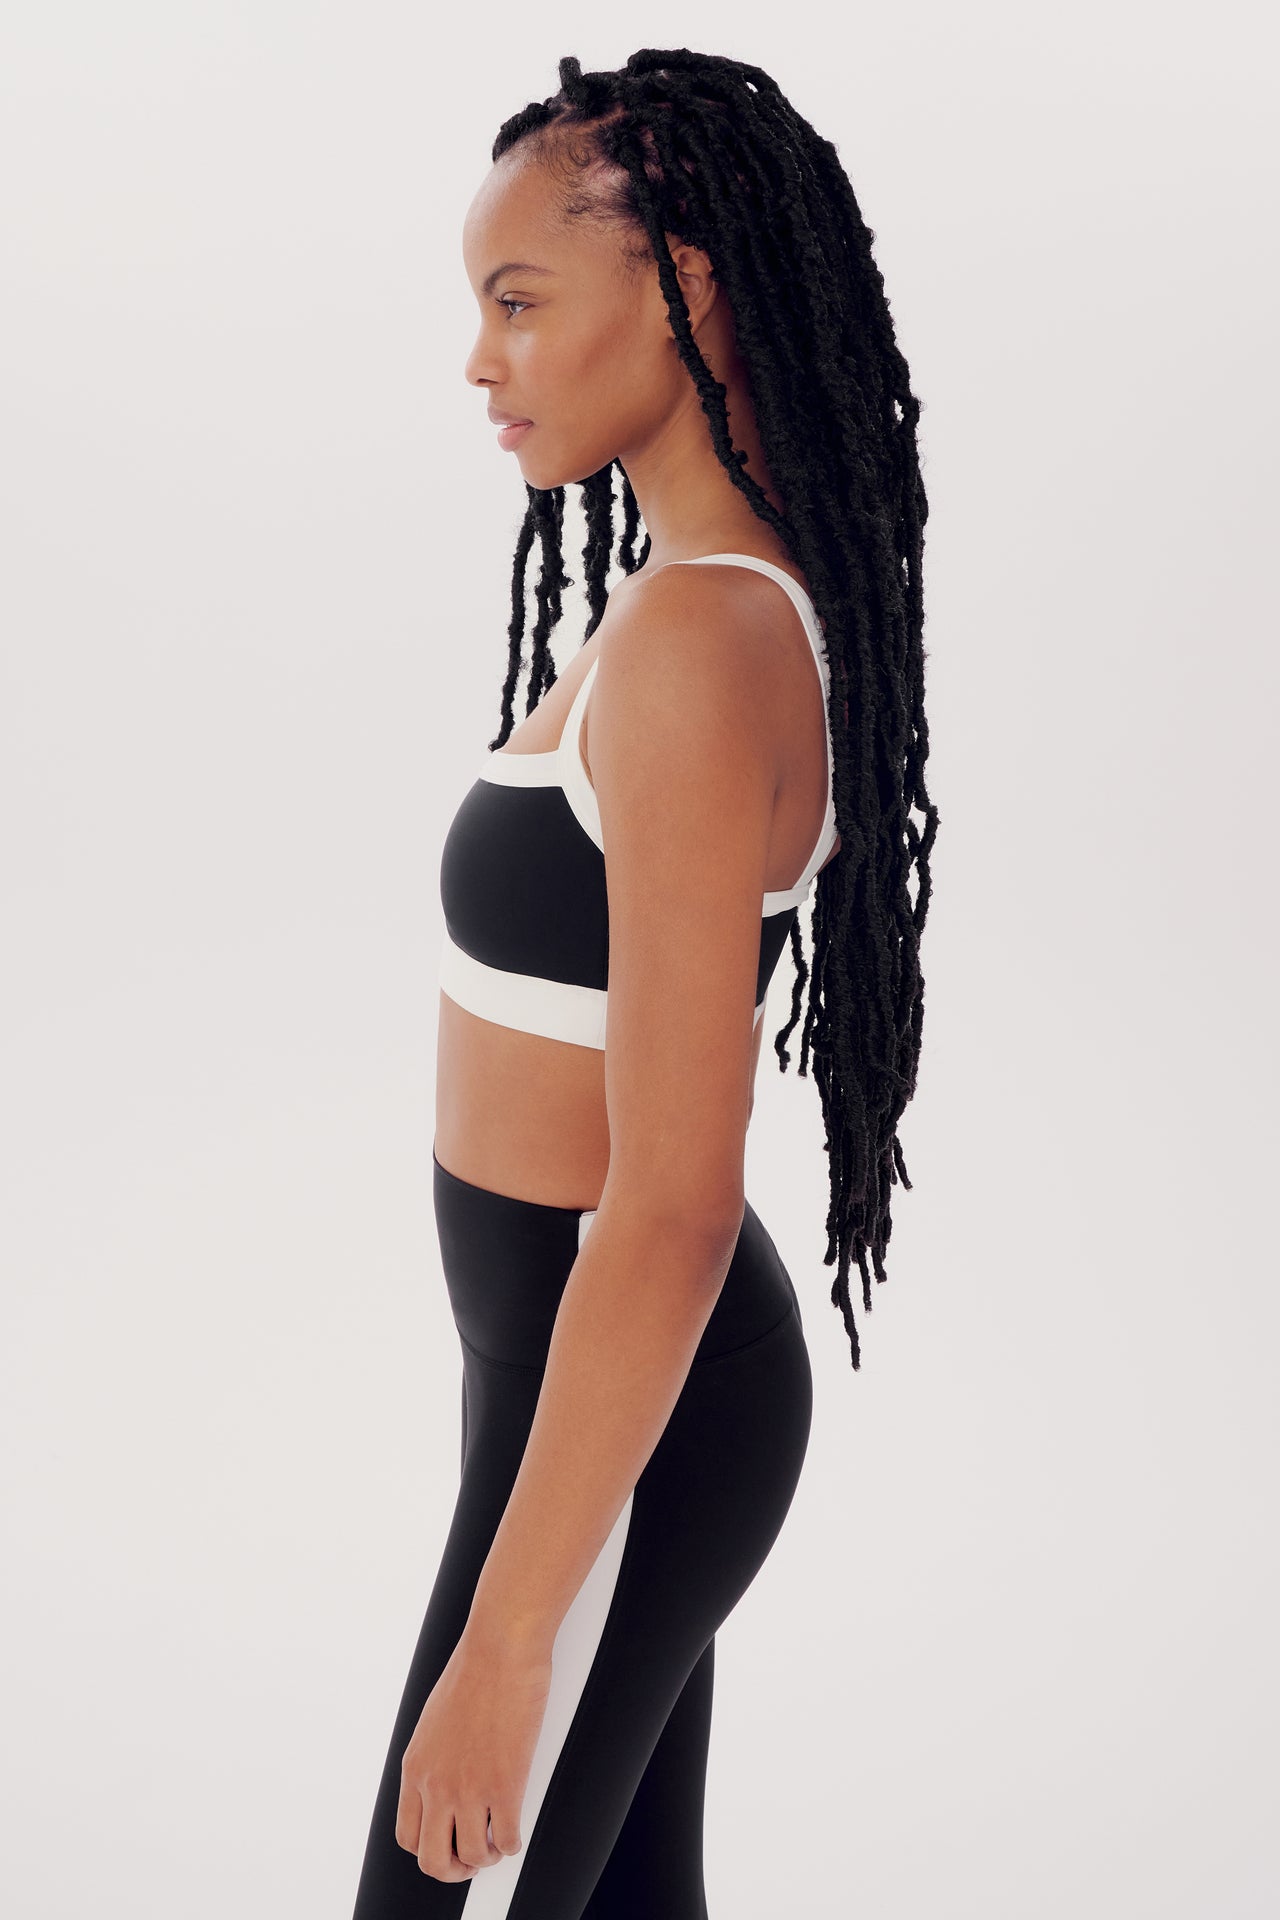 A woman in a black and white Monah Rigor Bra by SPLITS59 sports outfit stands in profile against a white background, with long braided hair.